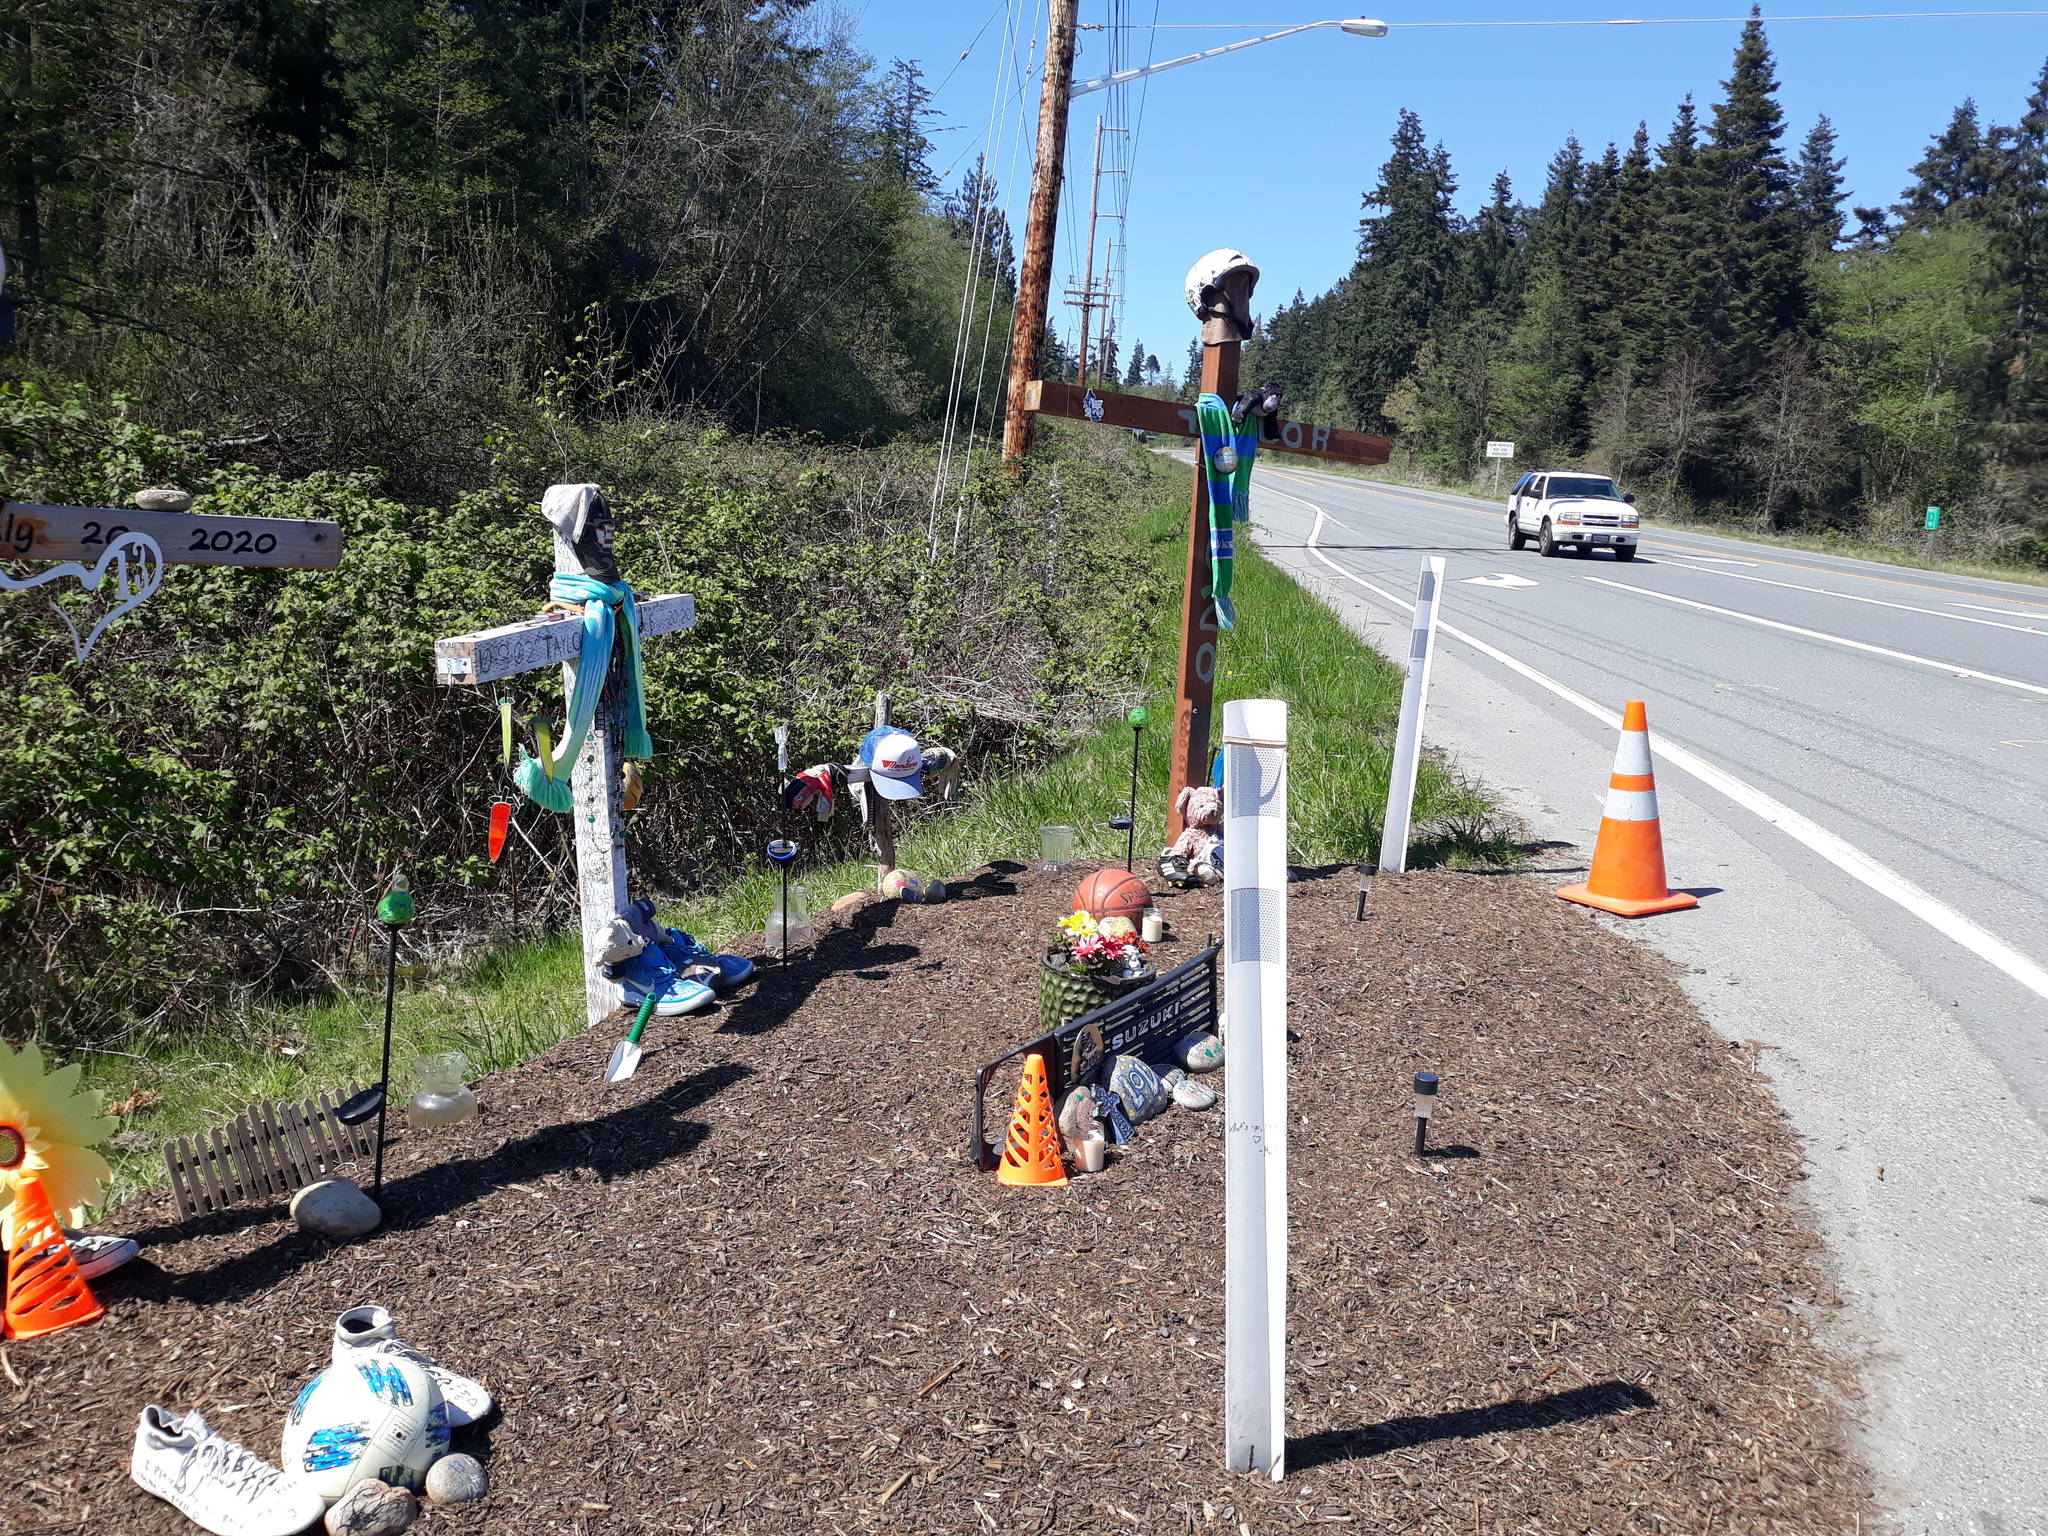 Crosses along the side of Bush Road on South Whidbey. Photo by Martin Nix.